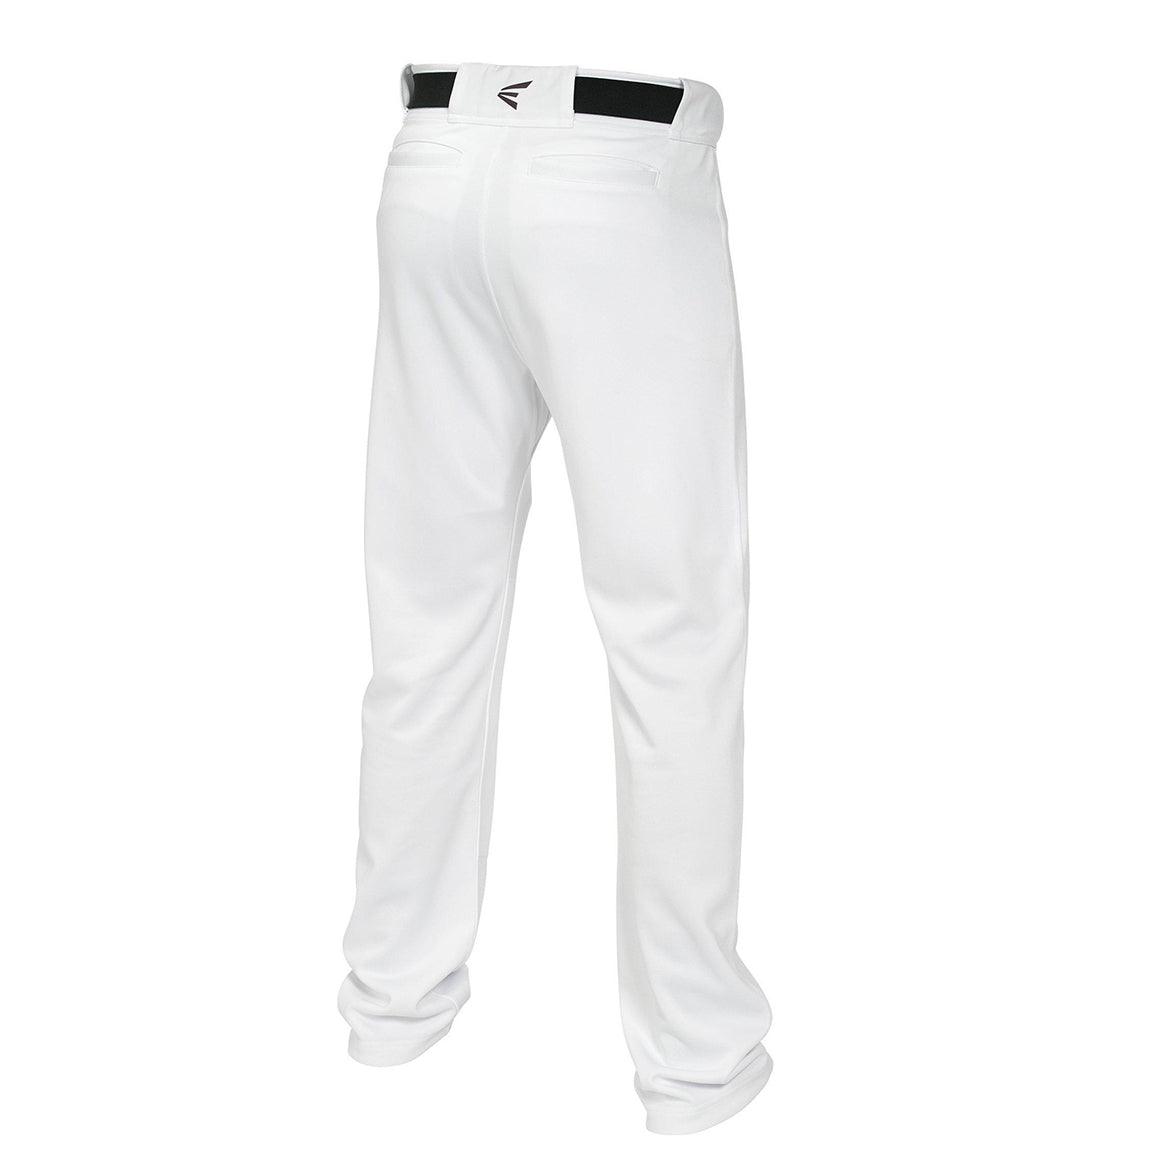 Mako 2 Pants - Sports Excellence